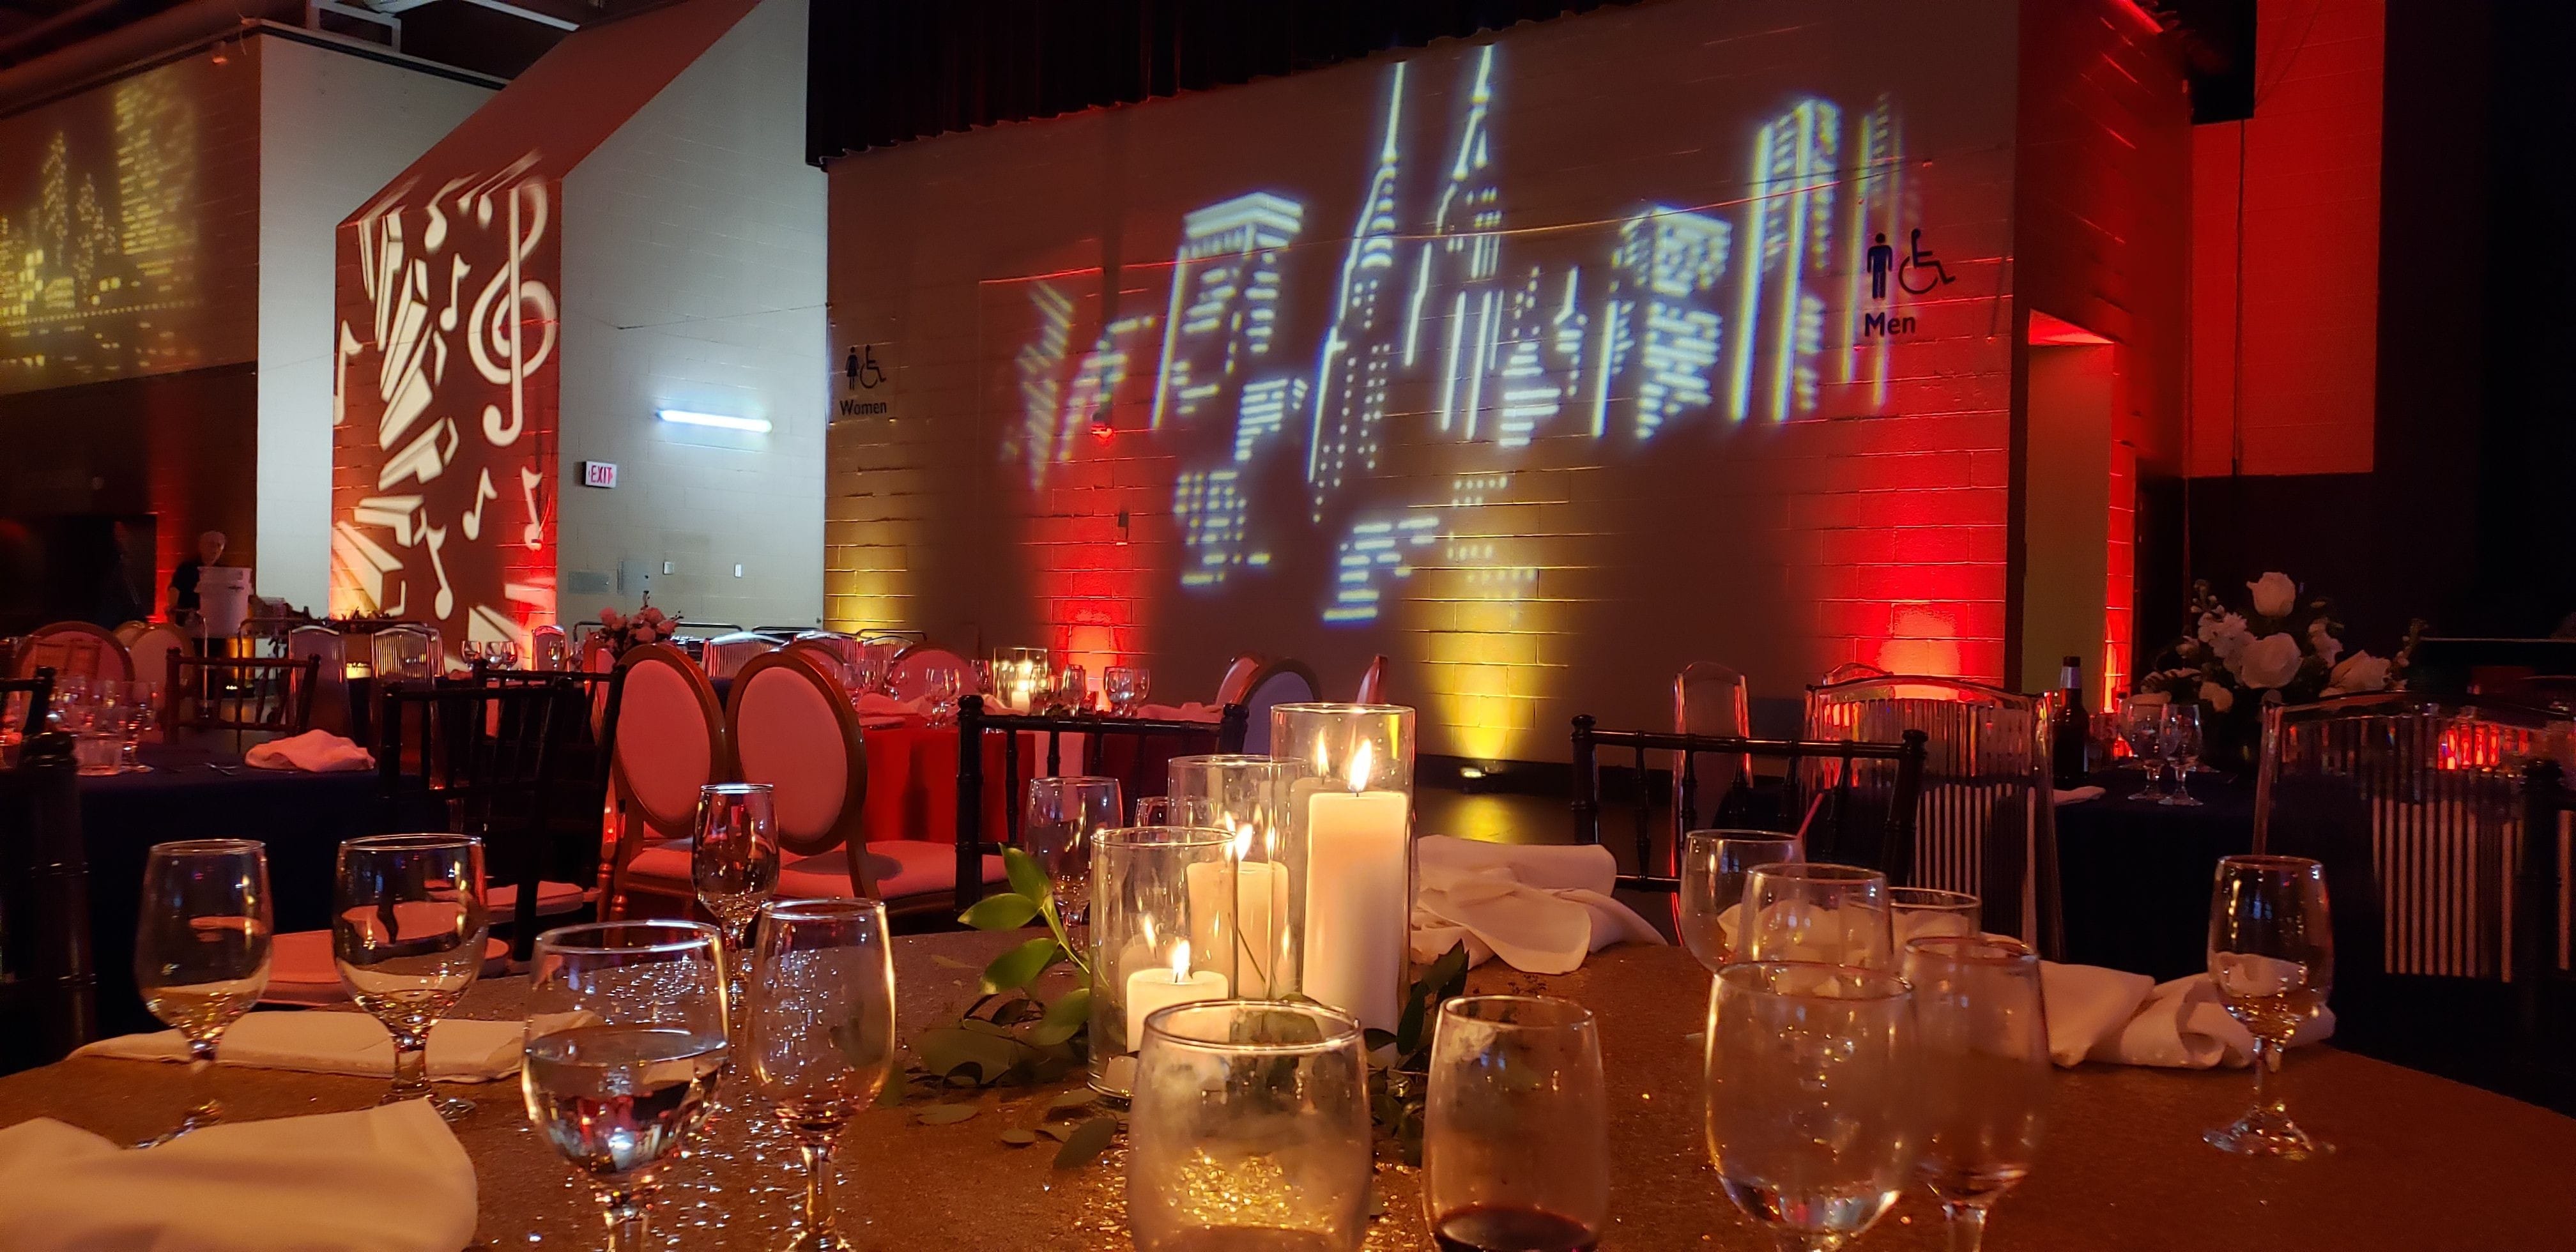 Event Lighting in pioneer Hall by Duluth Event Lighting. Red and gold up lighting, gobos on the walls,chandeliers provided by Duluth Event Lighting.